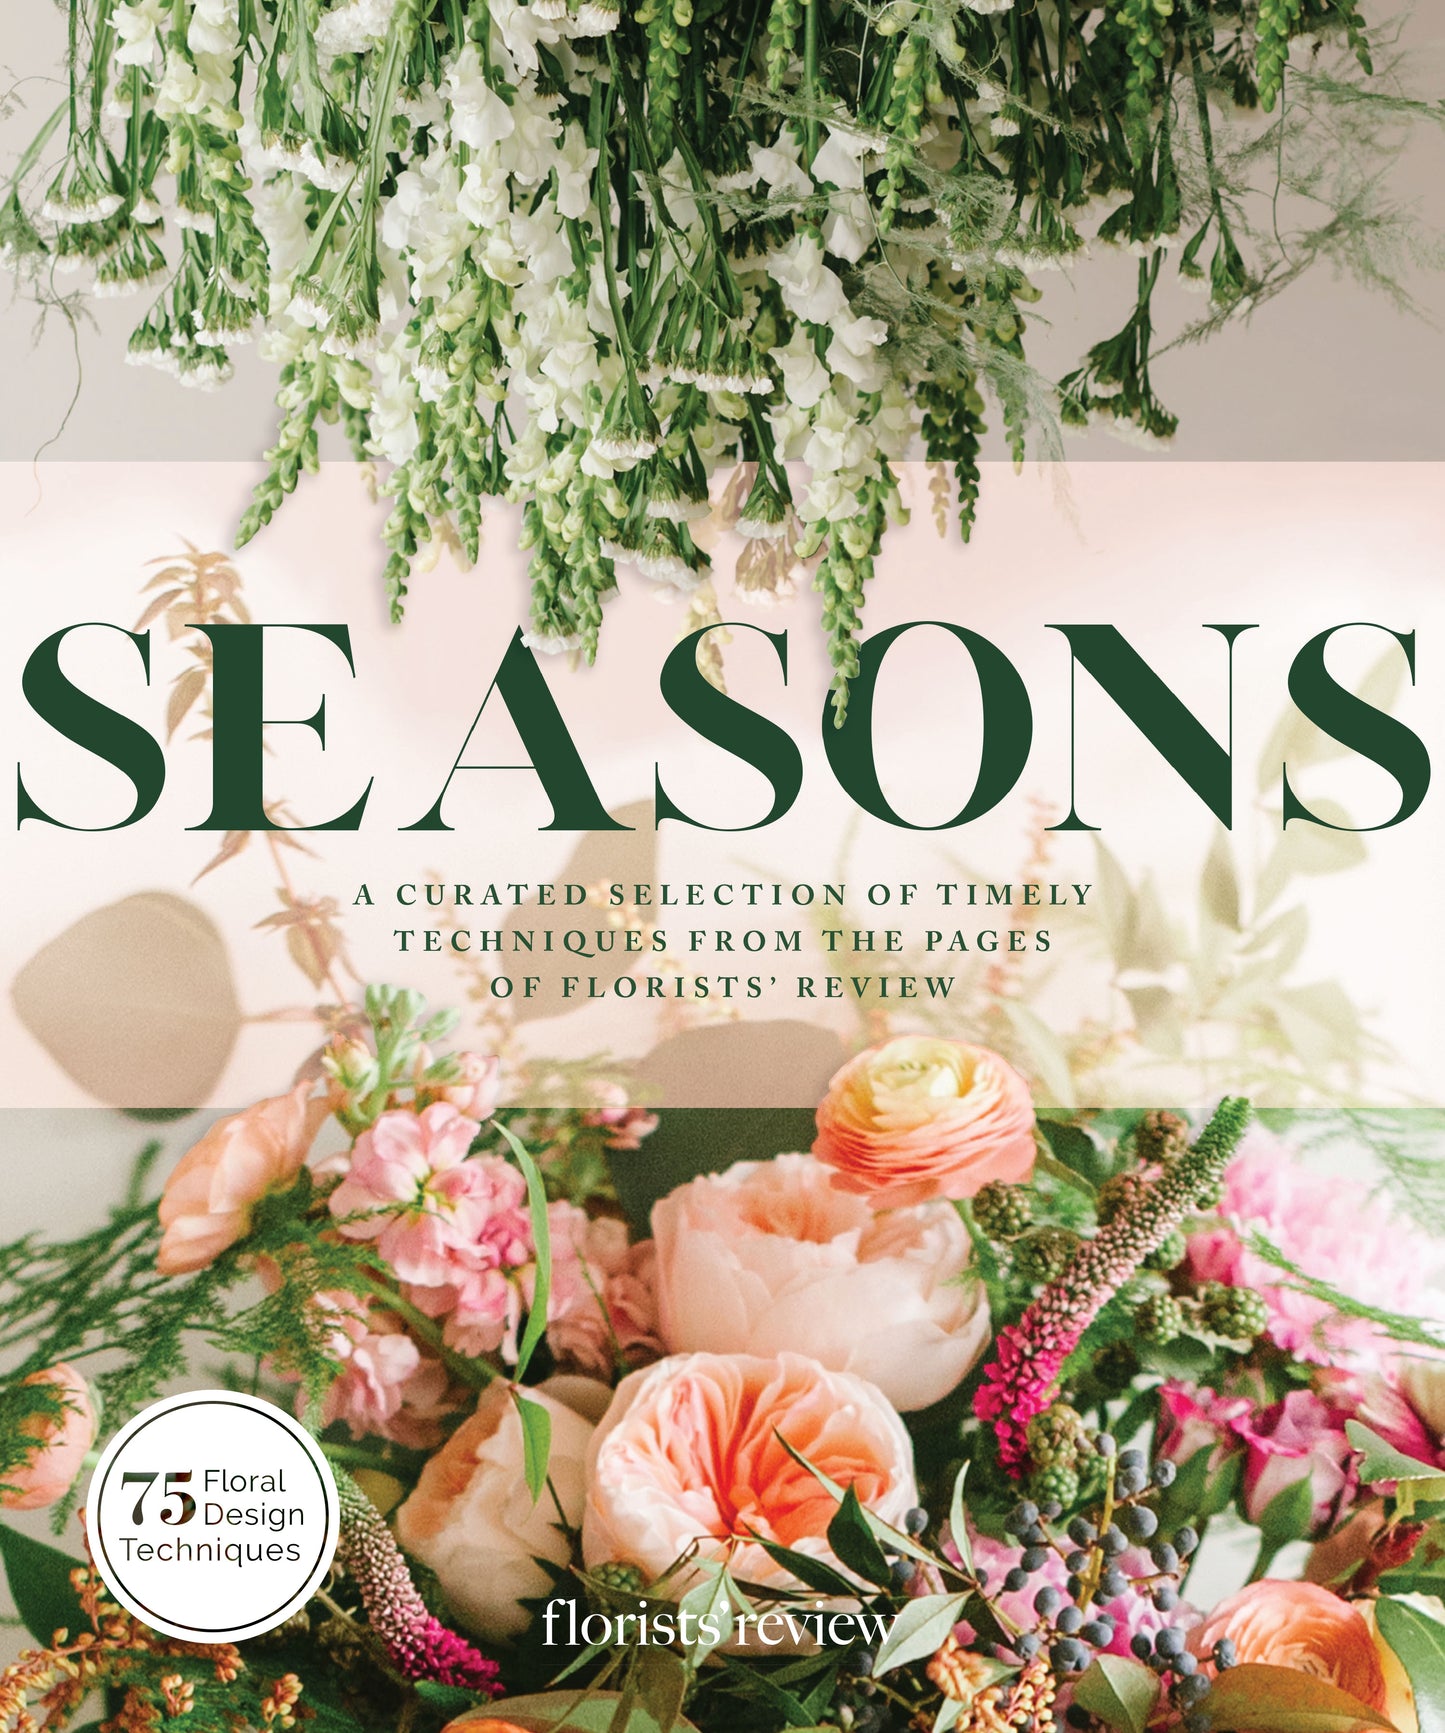 Inspirational Publisher's Pack - Six of Our Best-Selling Floral Design Books - One Great Price!